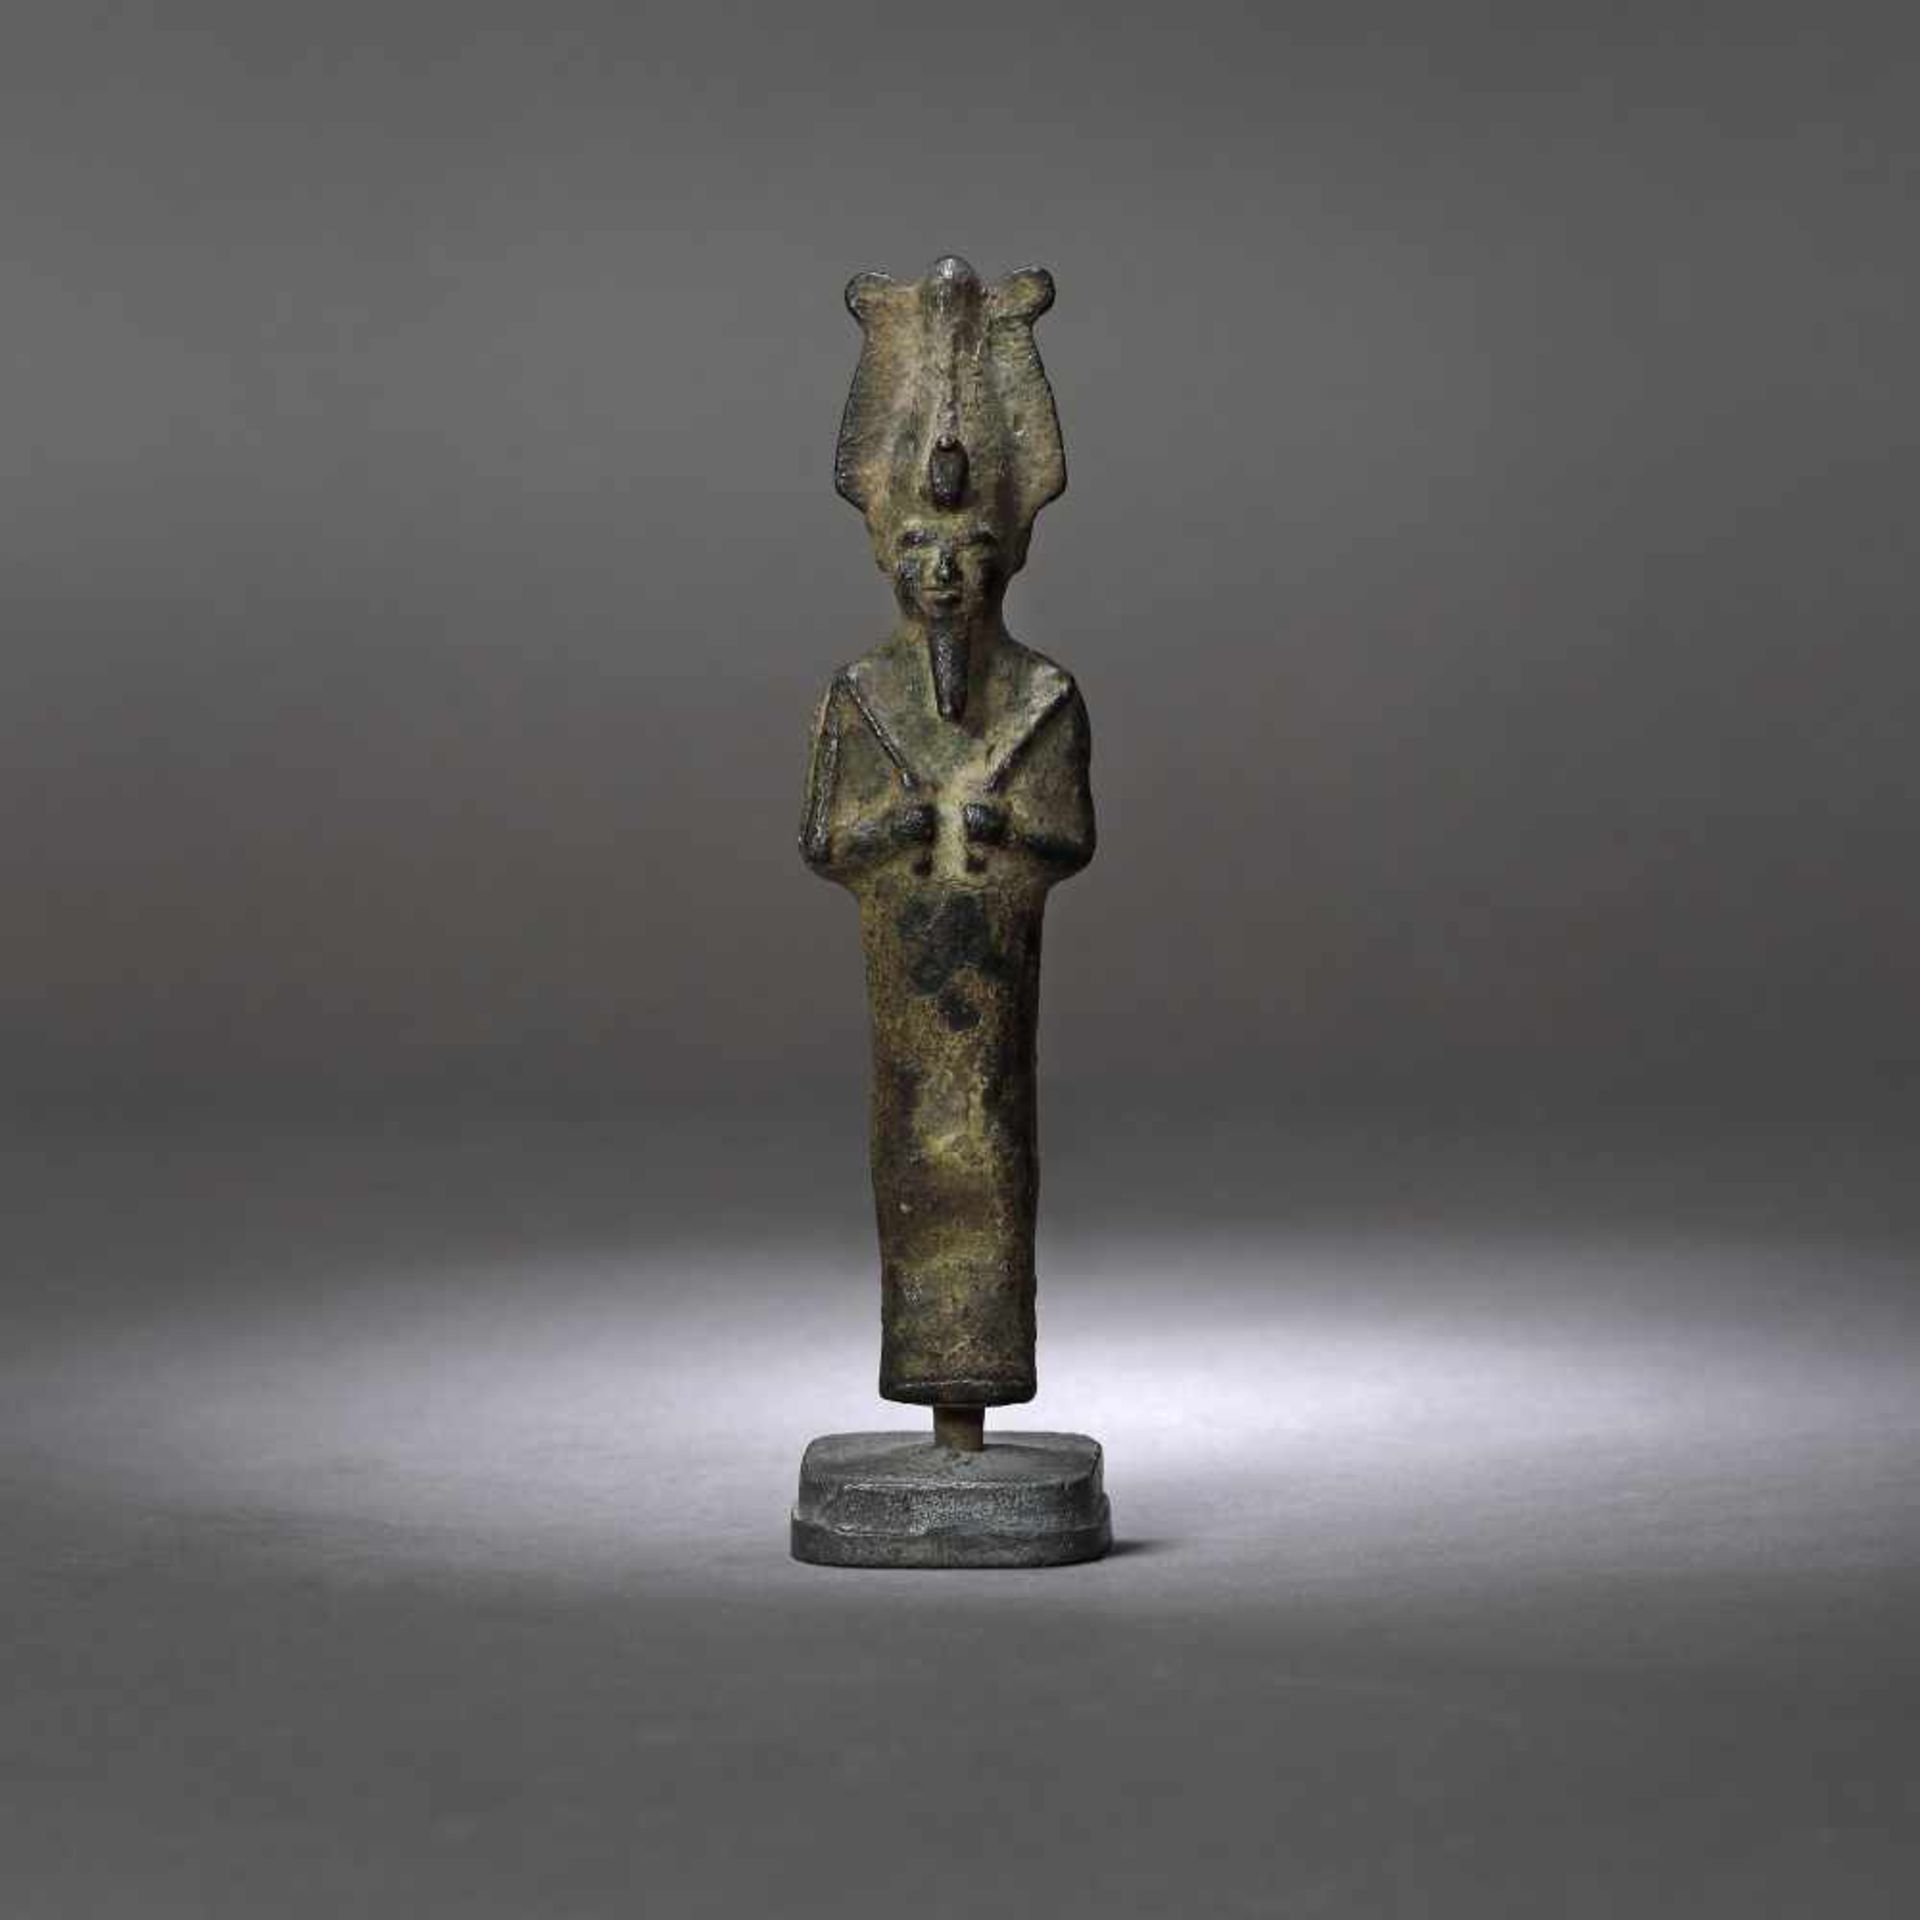 Egyptian bronze statuette, representing Osiris (god of life, afterlife and resurrection), probably t